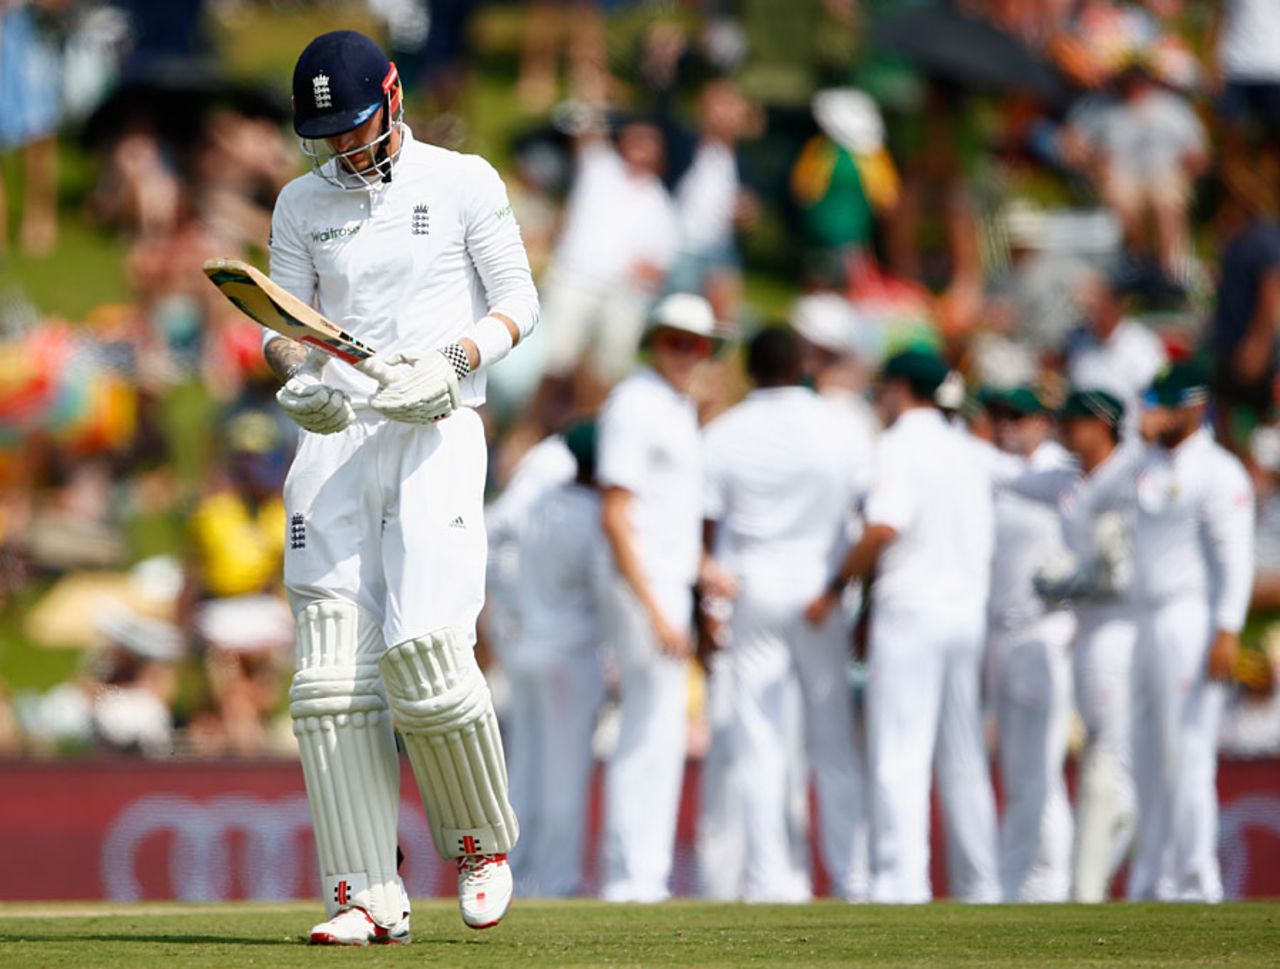 Alex Hales fell early in England's reply, South Africa v England, 4th Test, Centurion, 2nd day, January 23, 2016